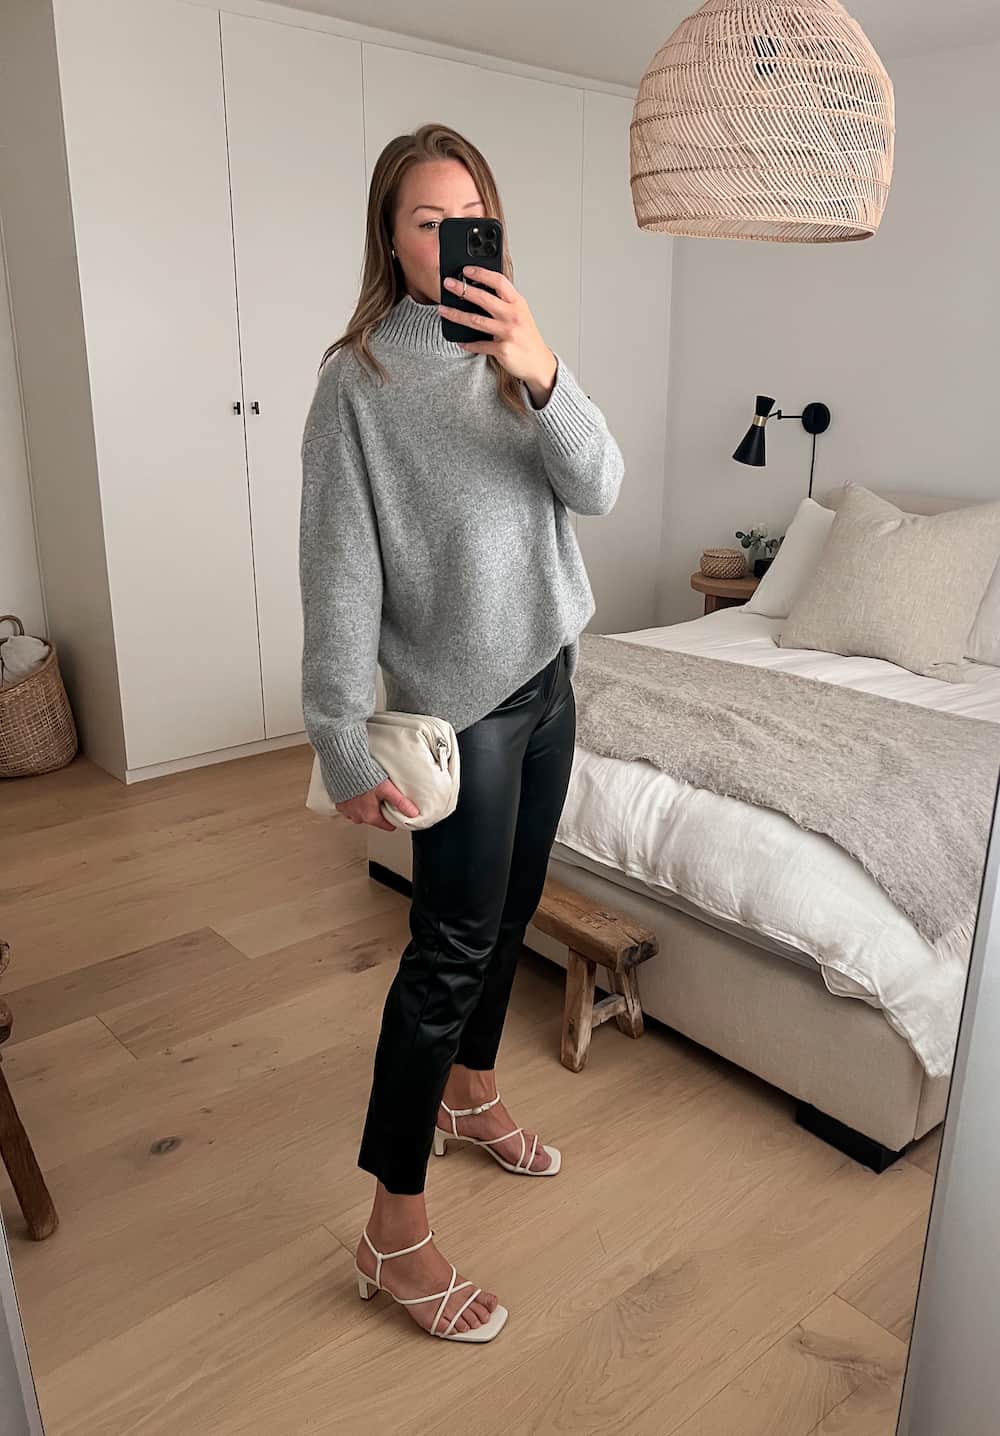 woman wearing an oversized grey turtleneck with black leather pants and while heeled sandals